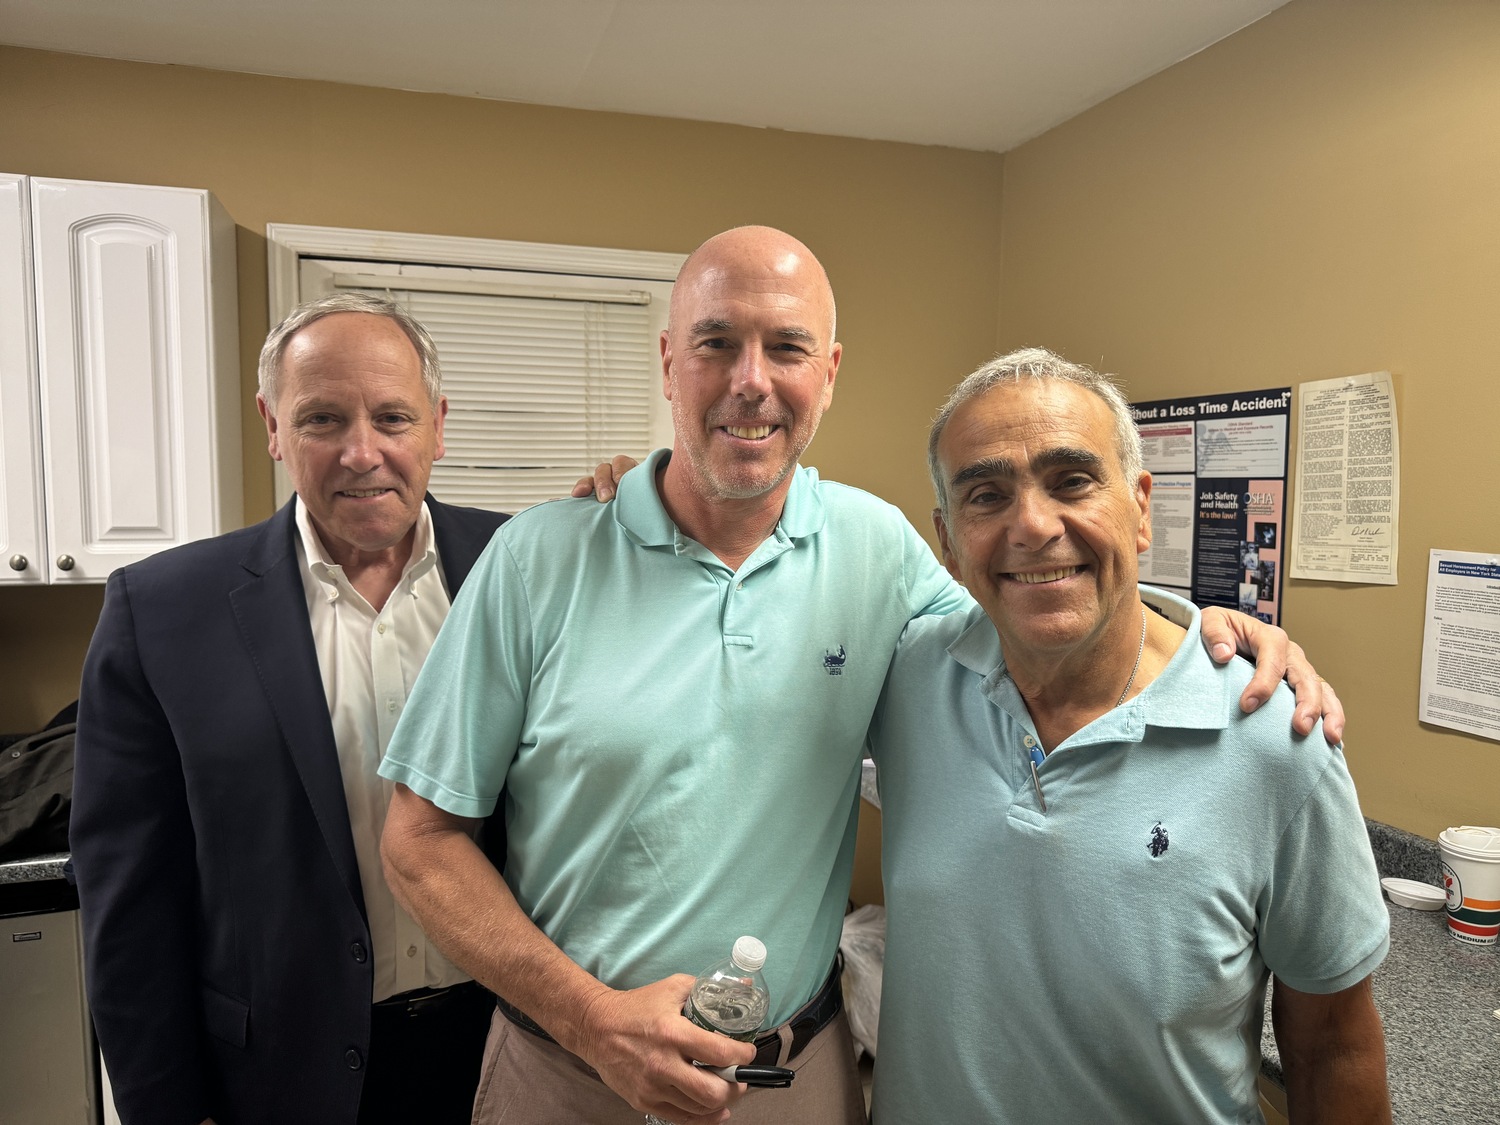 Mayor Gary Vegliante, right, with Trustee Michael Craig, center, and attorney Joseph Prokop on Friday night after the incumbents were swept out of office by voters. Vegliante and Prokop were the village's founding fathers in 1993 and Vegliante had only been challenged for mayor once in his 30-plus years in office. MICHAEL WRIGHT